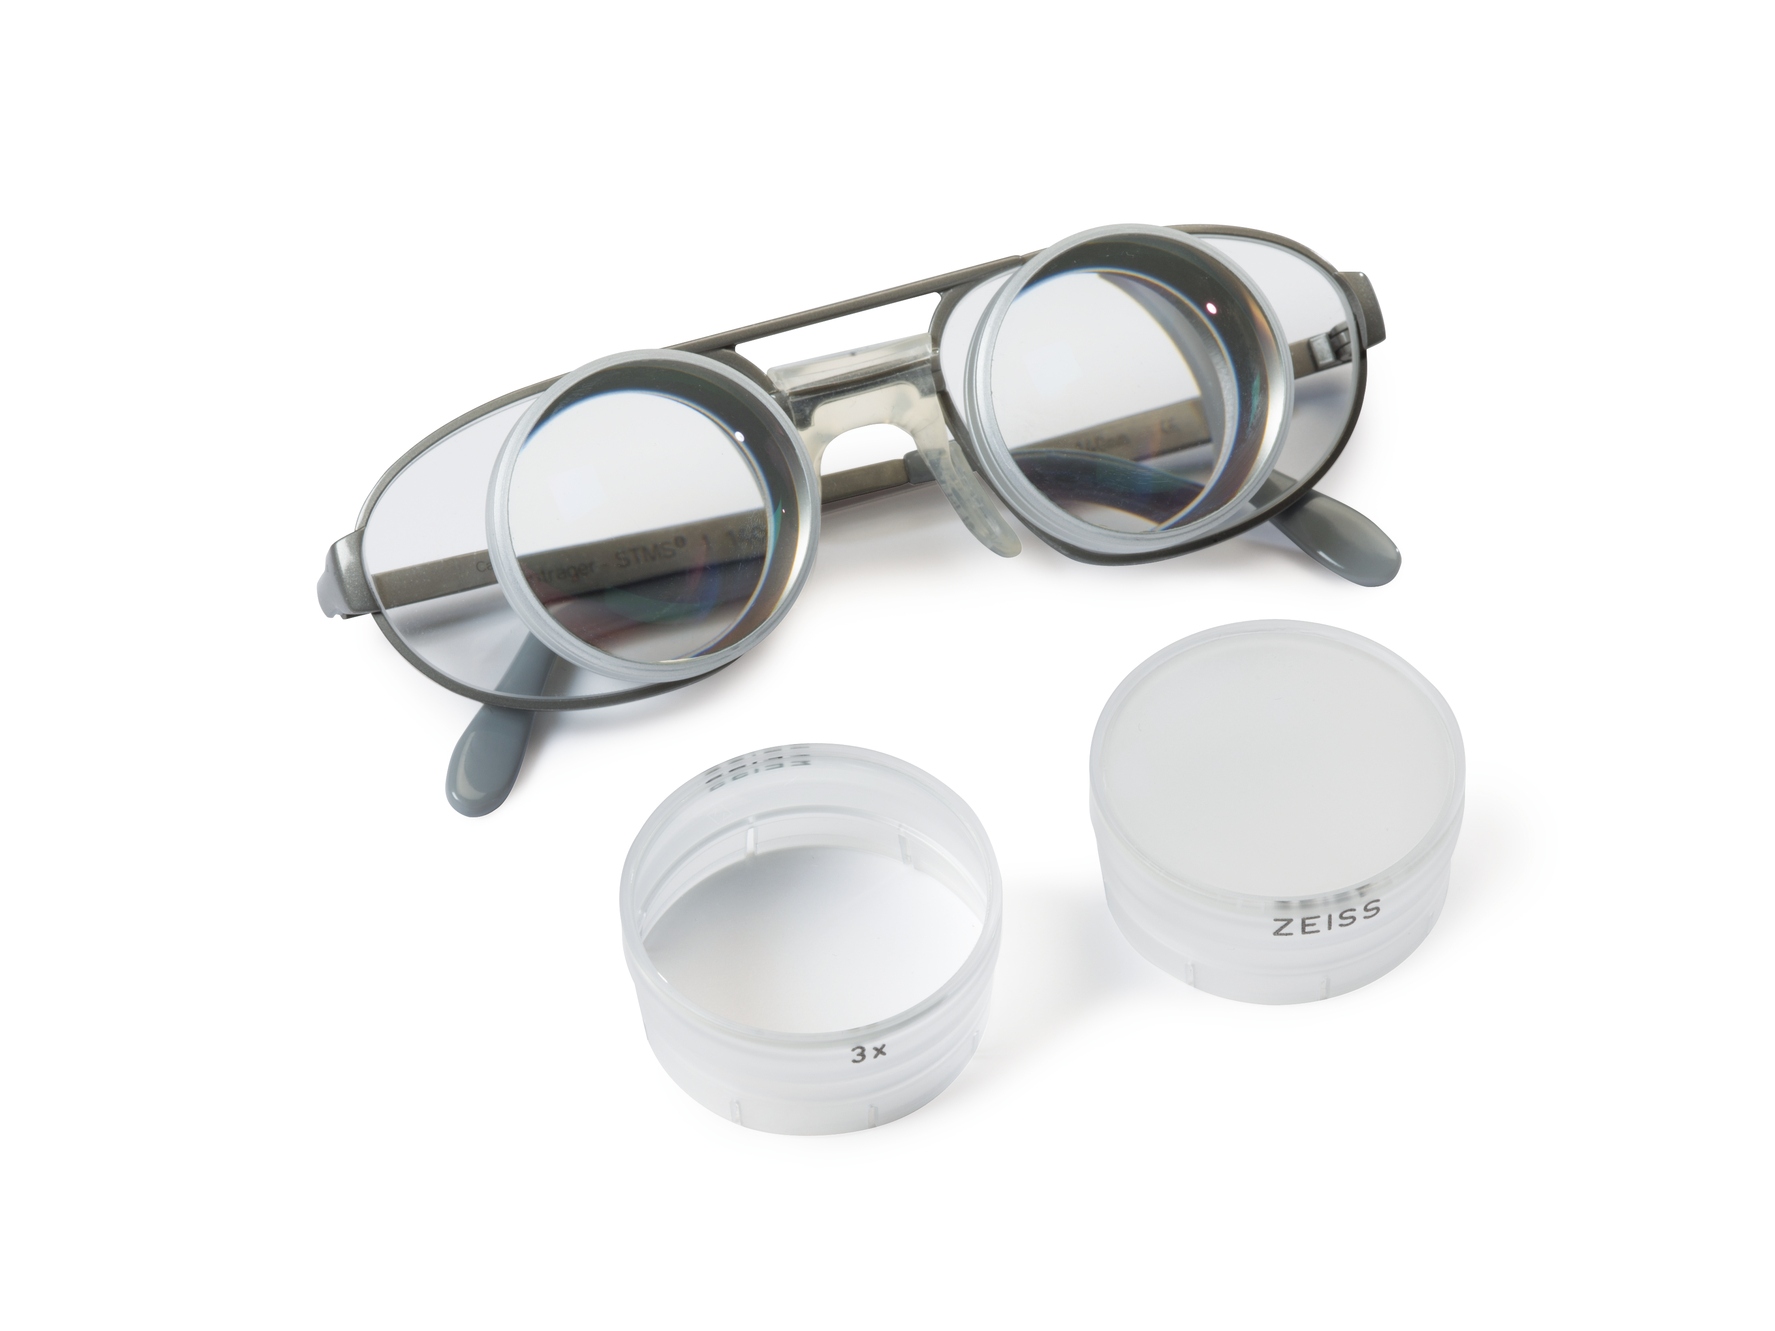 Regular spectacles frame with Galilean teleloupe attached directly onto the lenses.